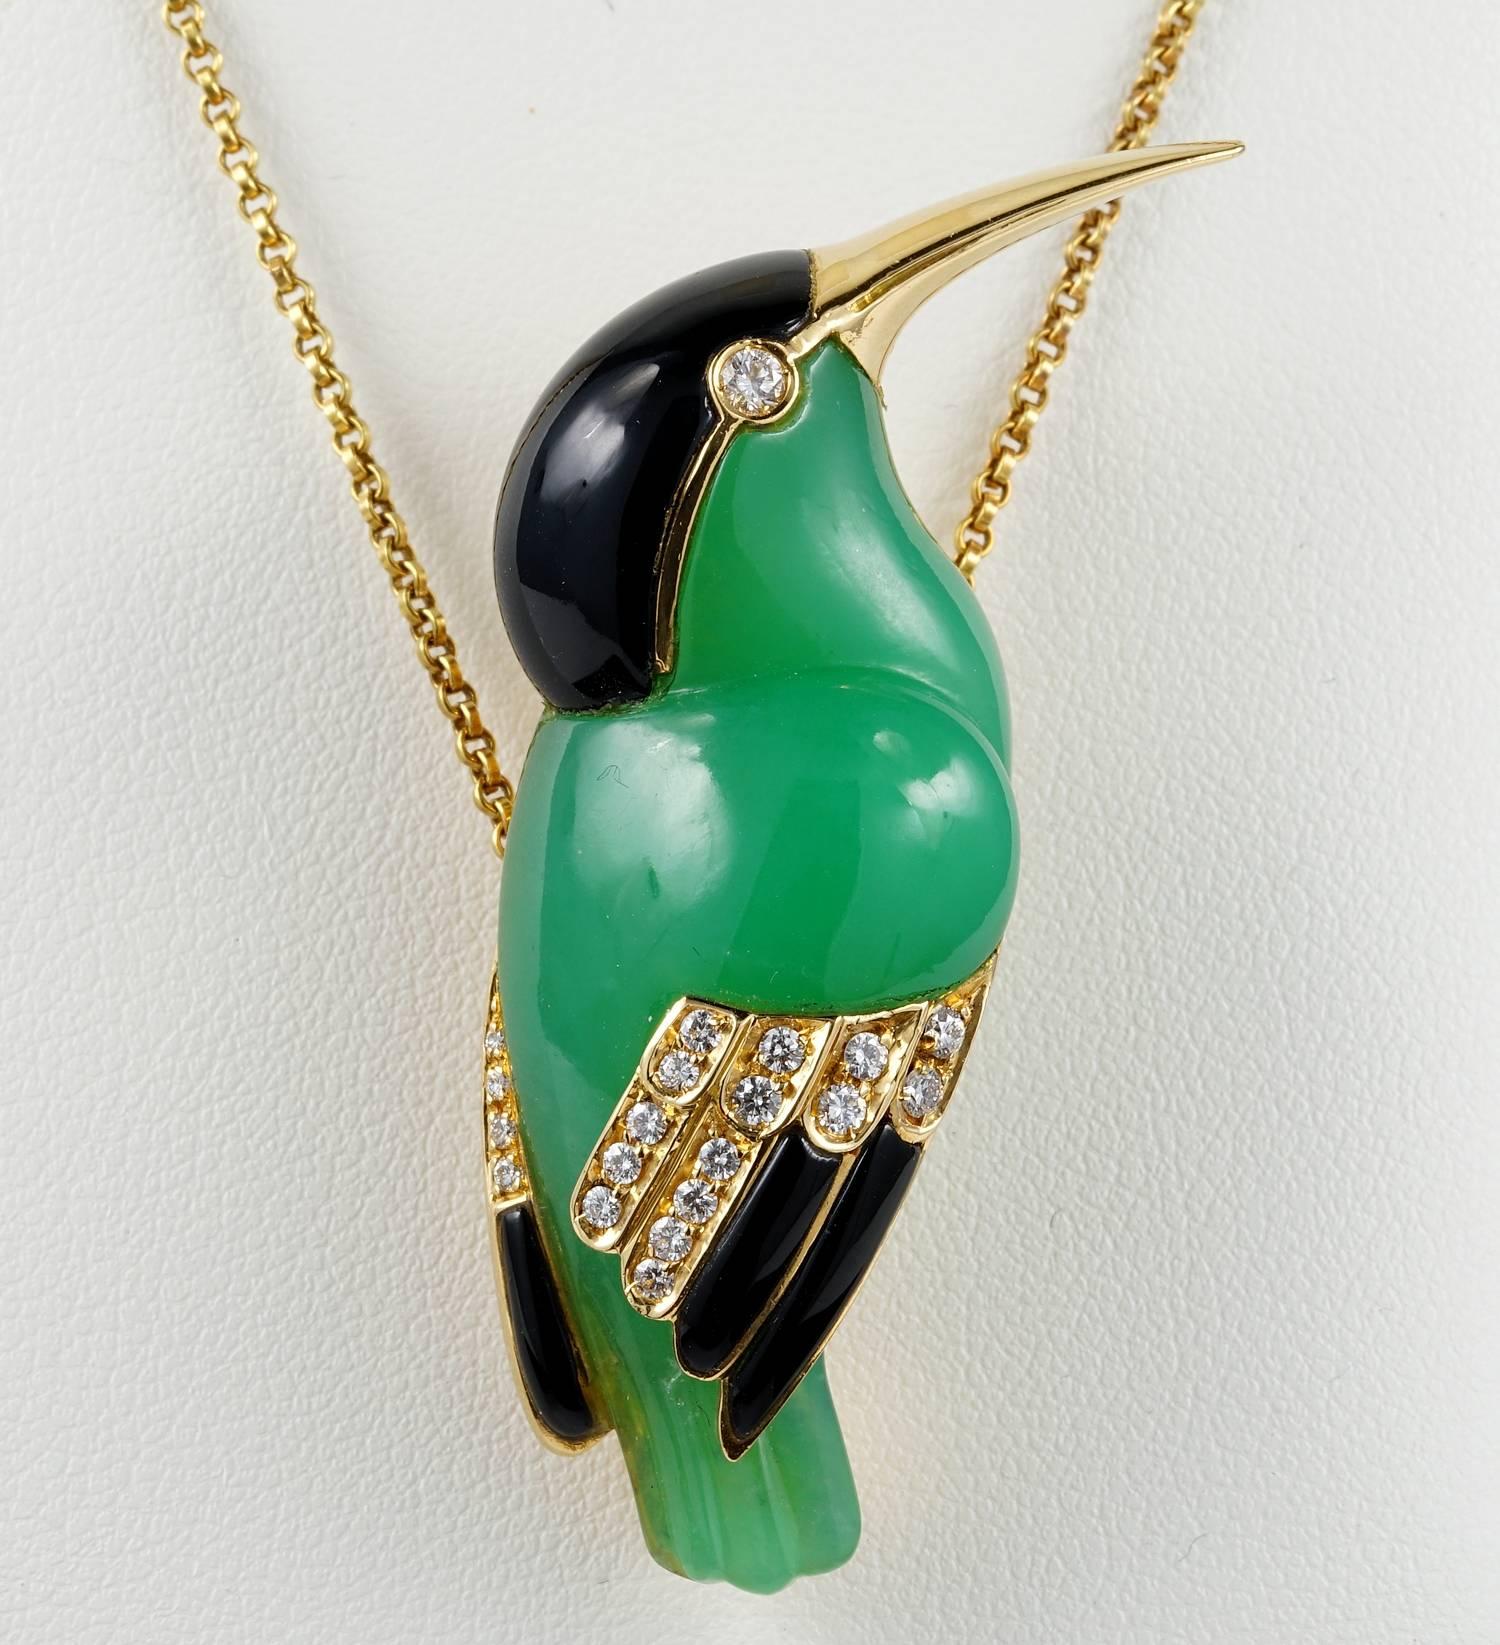 Stunningly hand carved from natural Green Chalcedony, Black Onyx with details made of Diamonds
exclusive Humming Bird made the by Ventrella maison in Rome during the 60's
An italian example of the collectable animalier theme, so charming and